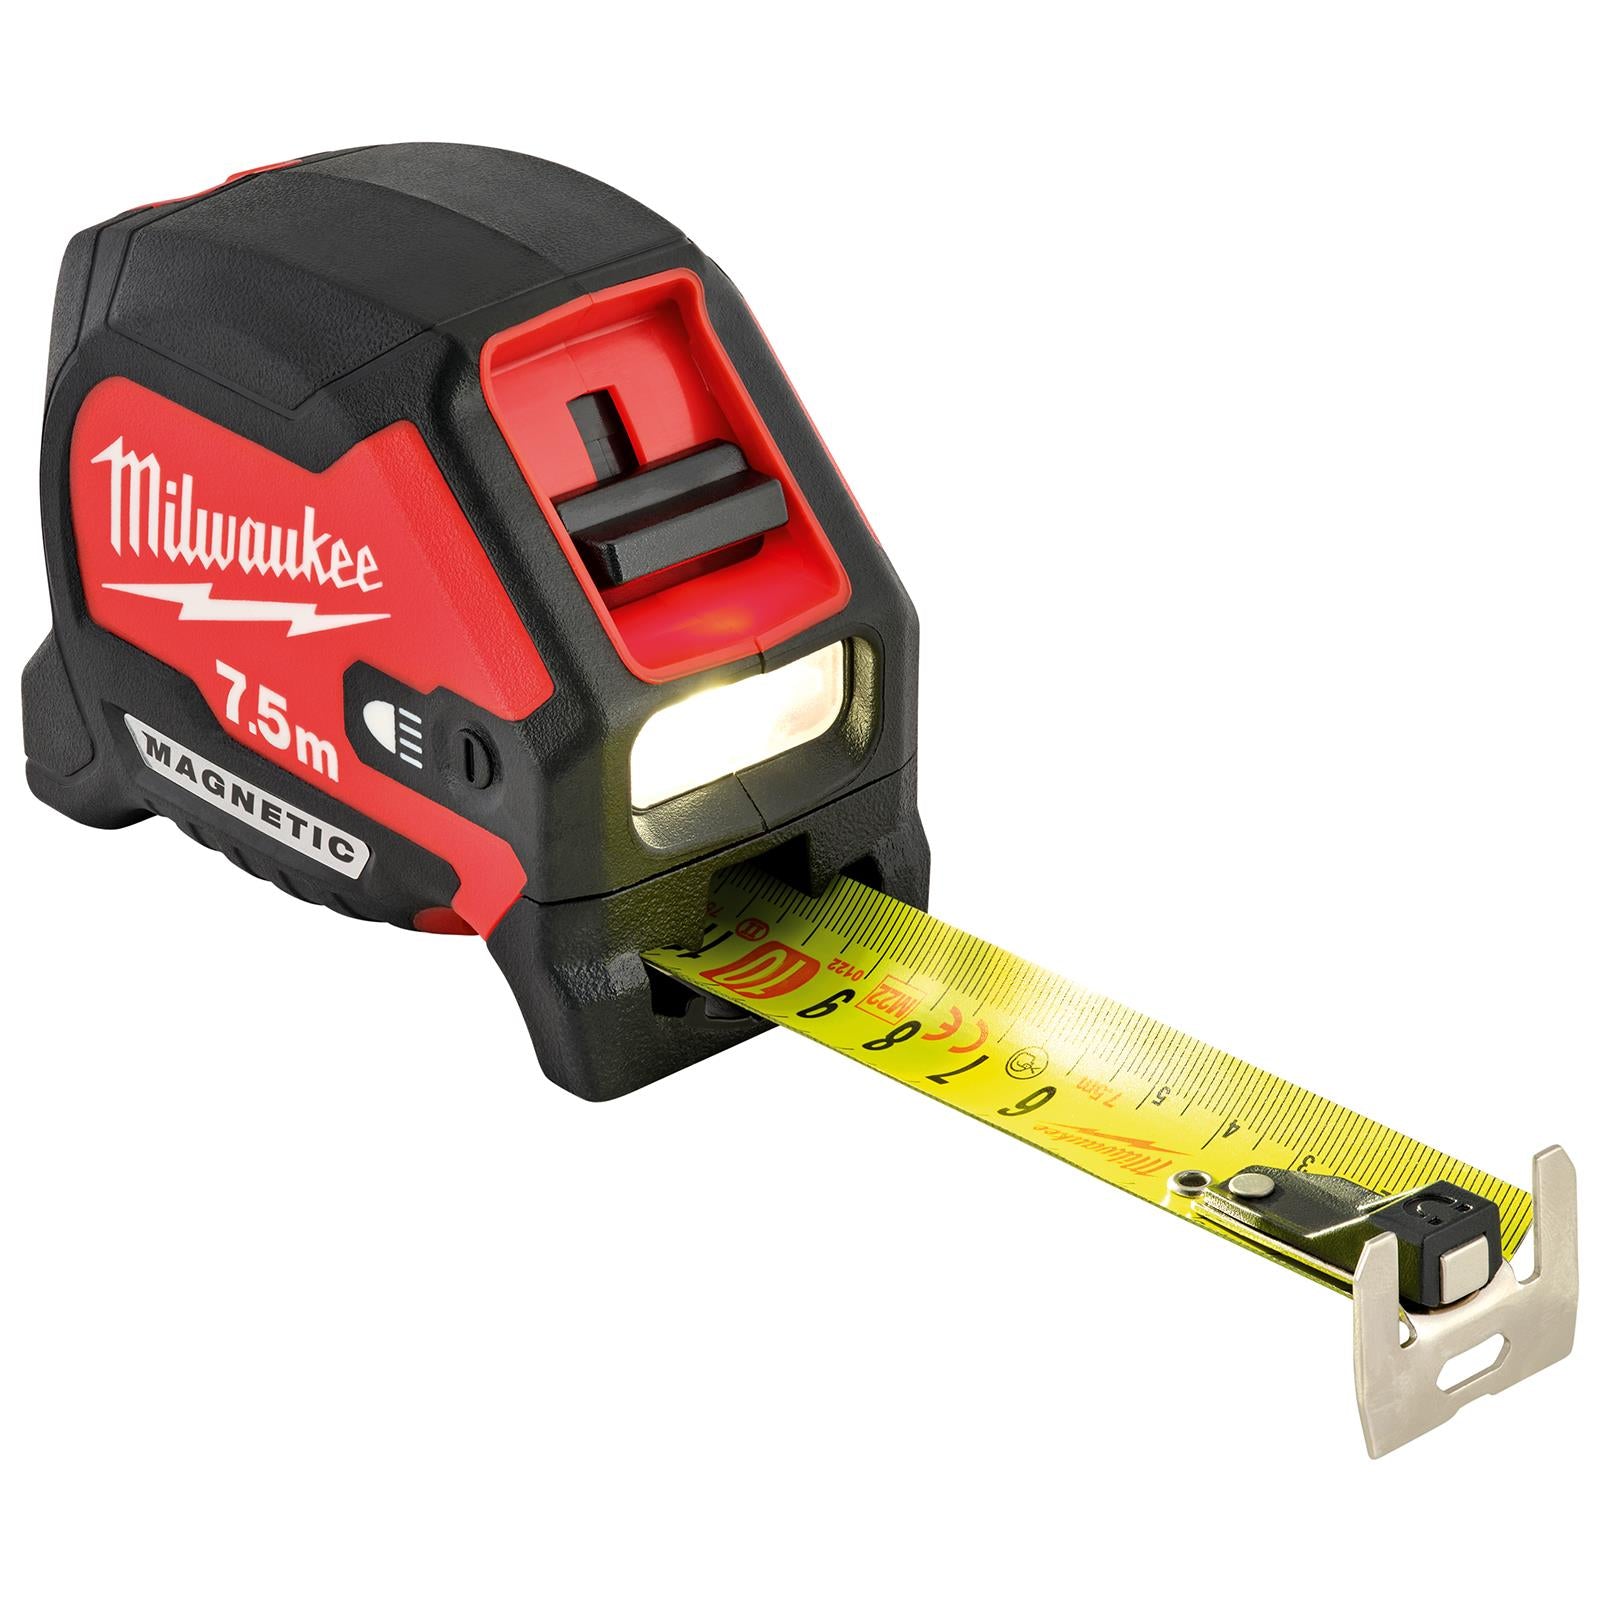 Milwaukee Tape Measure Magnetic 7.5m with LED Light 30mm Wide Blade 100 Lumens